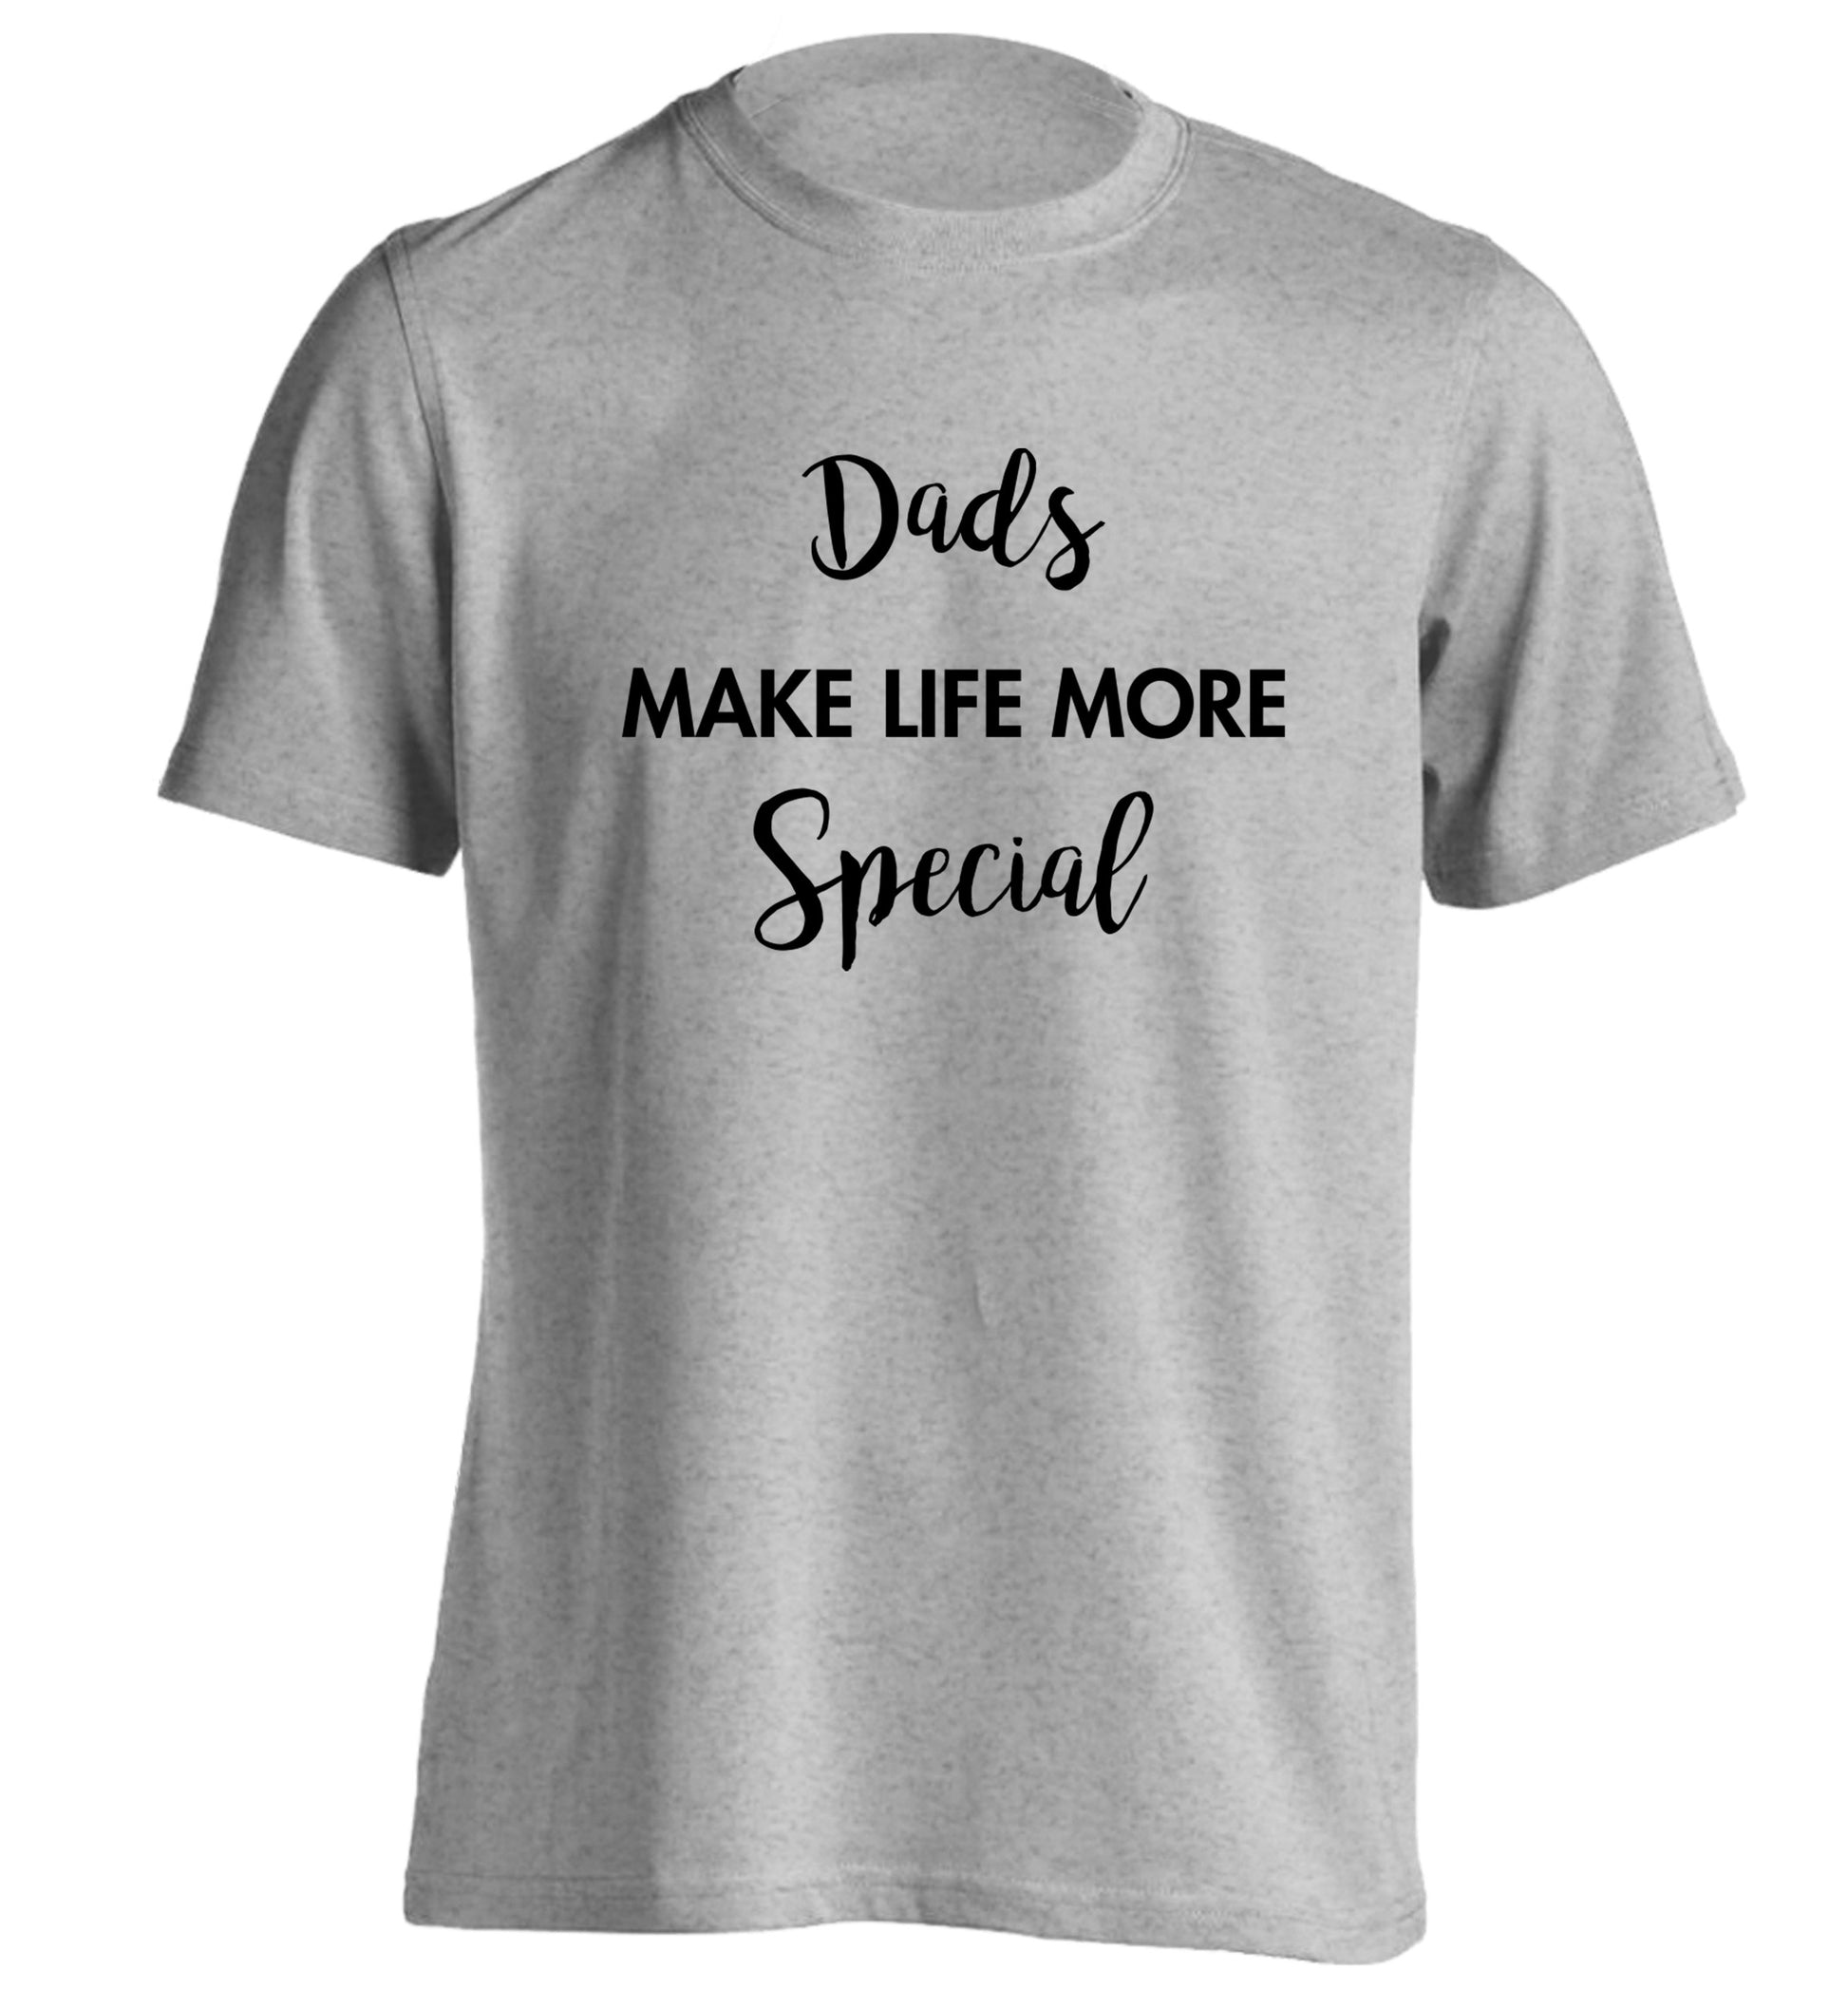 Dads make life more special adults unisex grey Tshirt 2XL